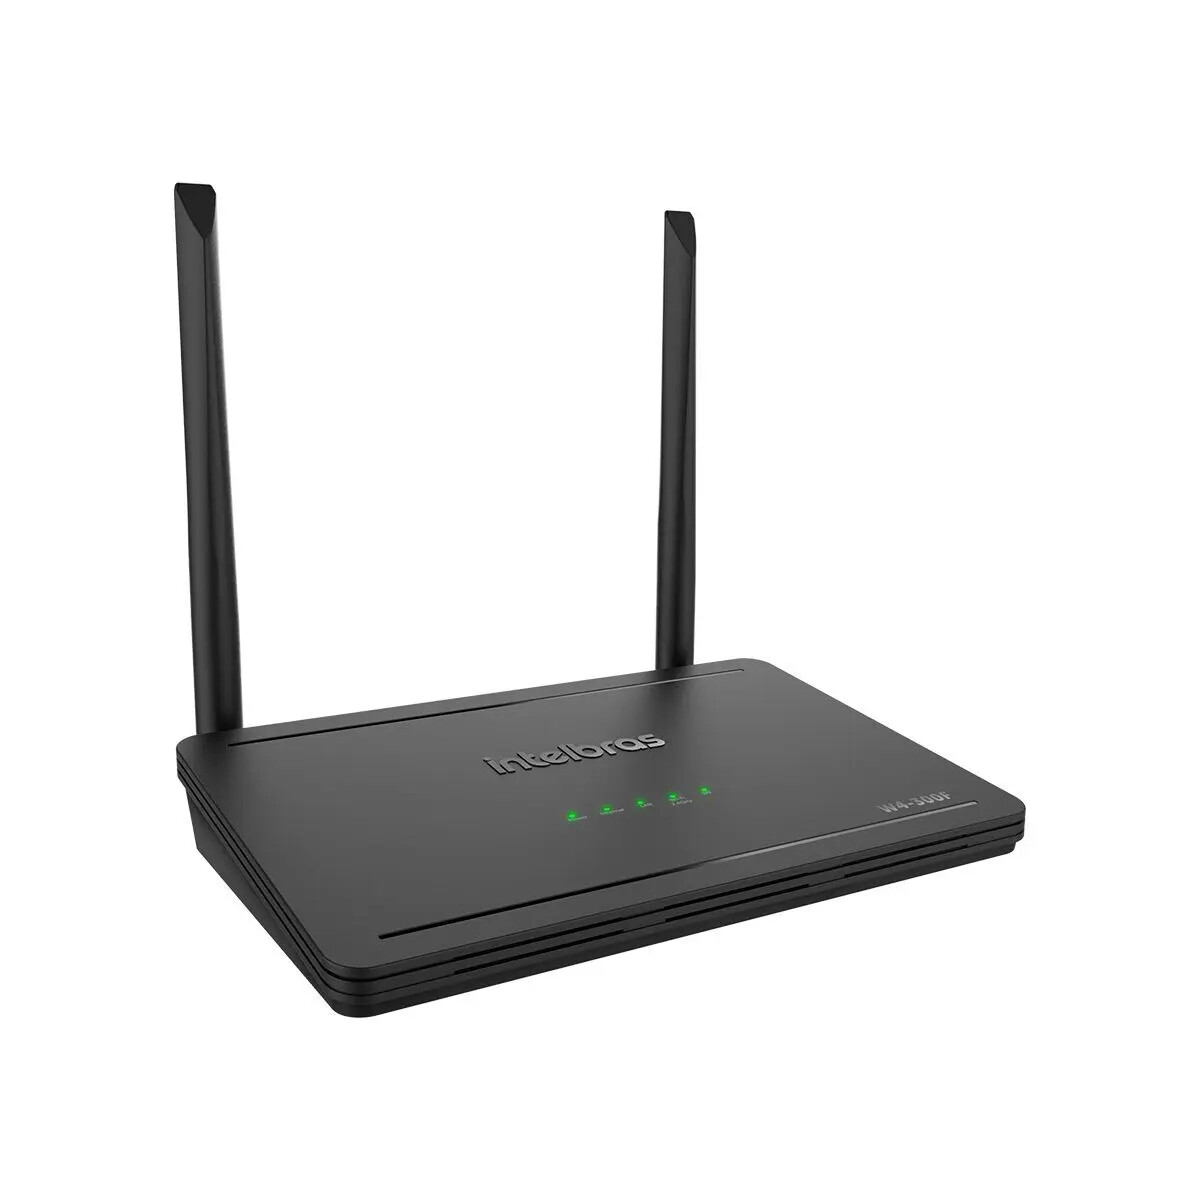 Red Inalambrica- wifi - Router W4-300F | INTELBRAS - Red Inalambrica- Wifi - Router W4-300f | Intelbras 